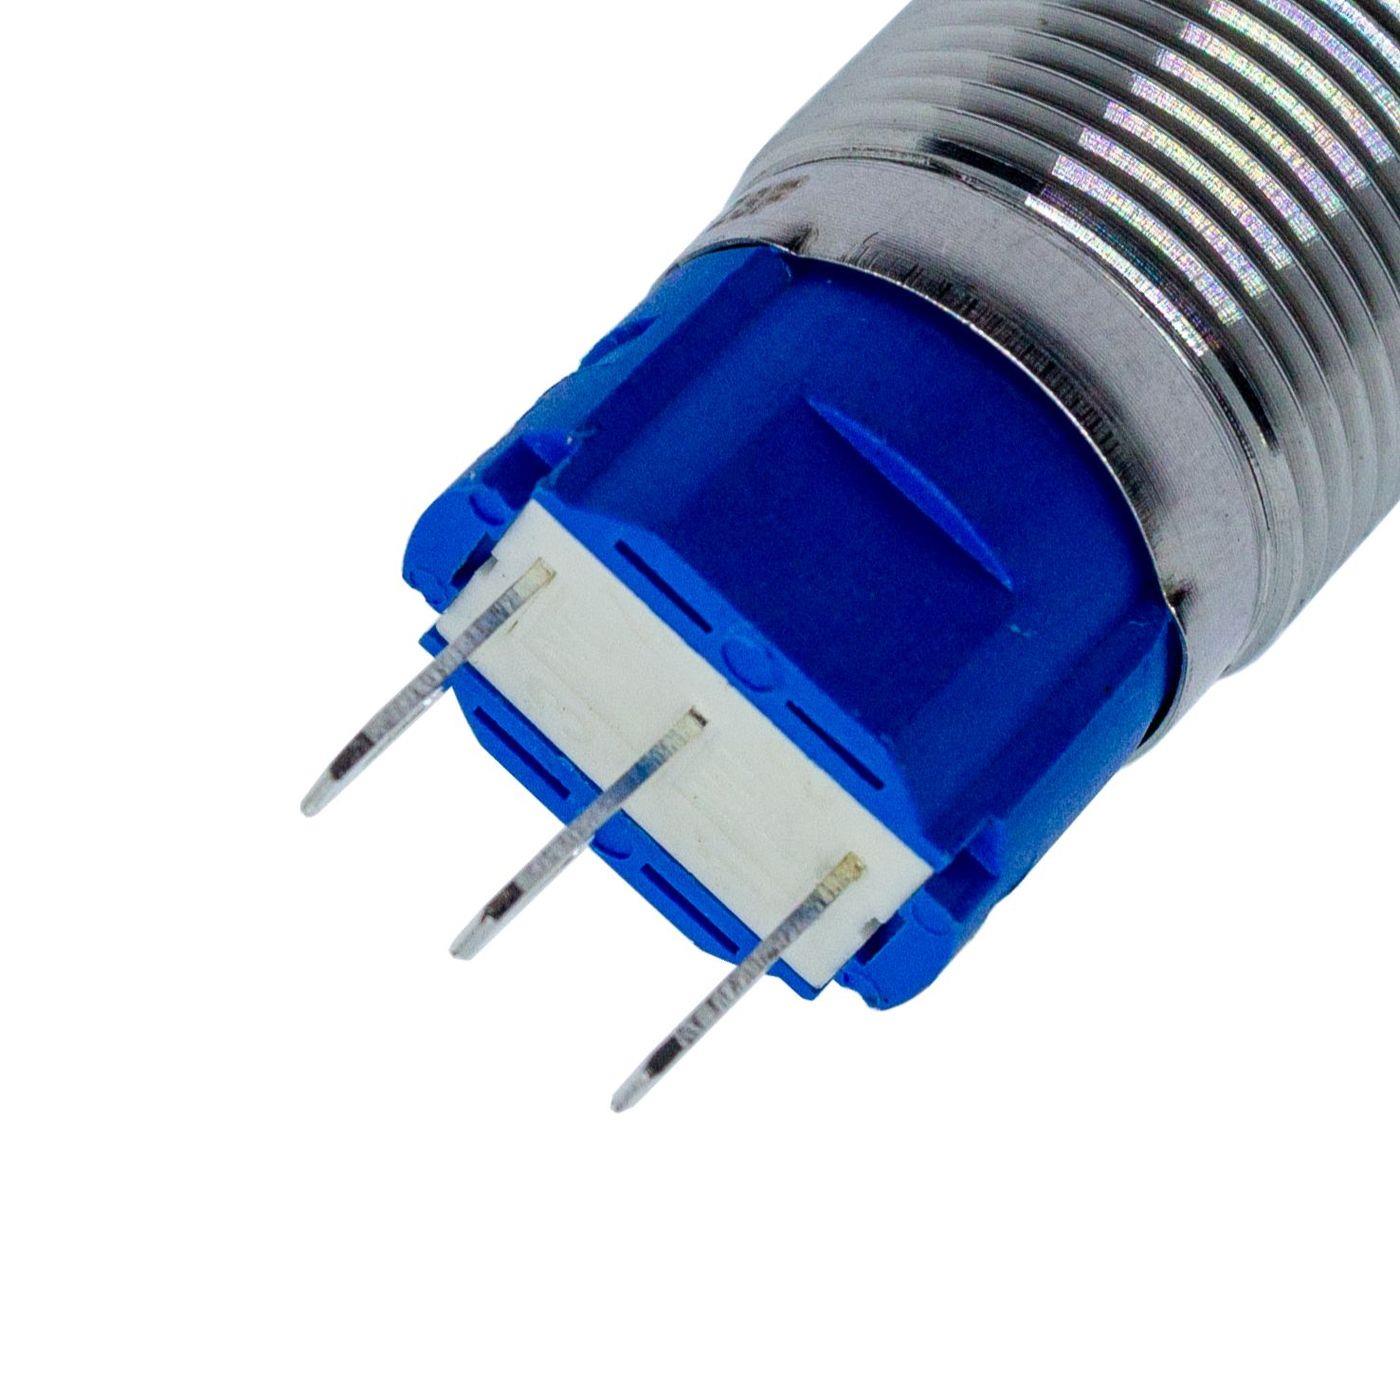 Stainless steel Pressure switch Flat Ø16mm IP65 2,8x0,5mm Pins 250V 3A Vandal-proof